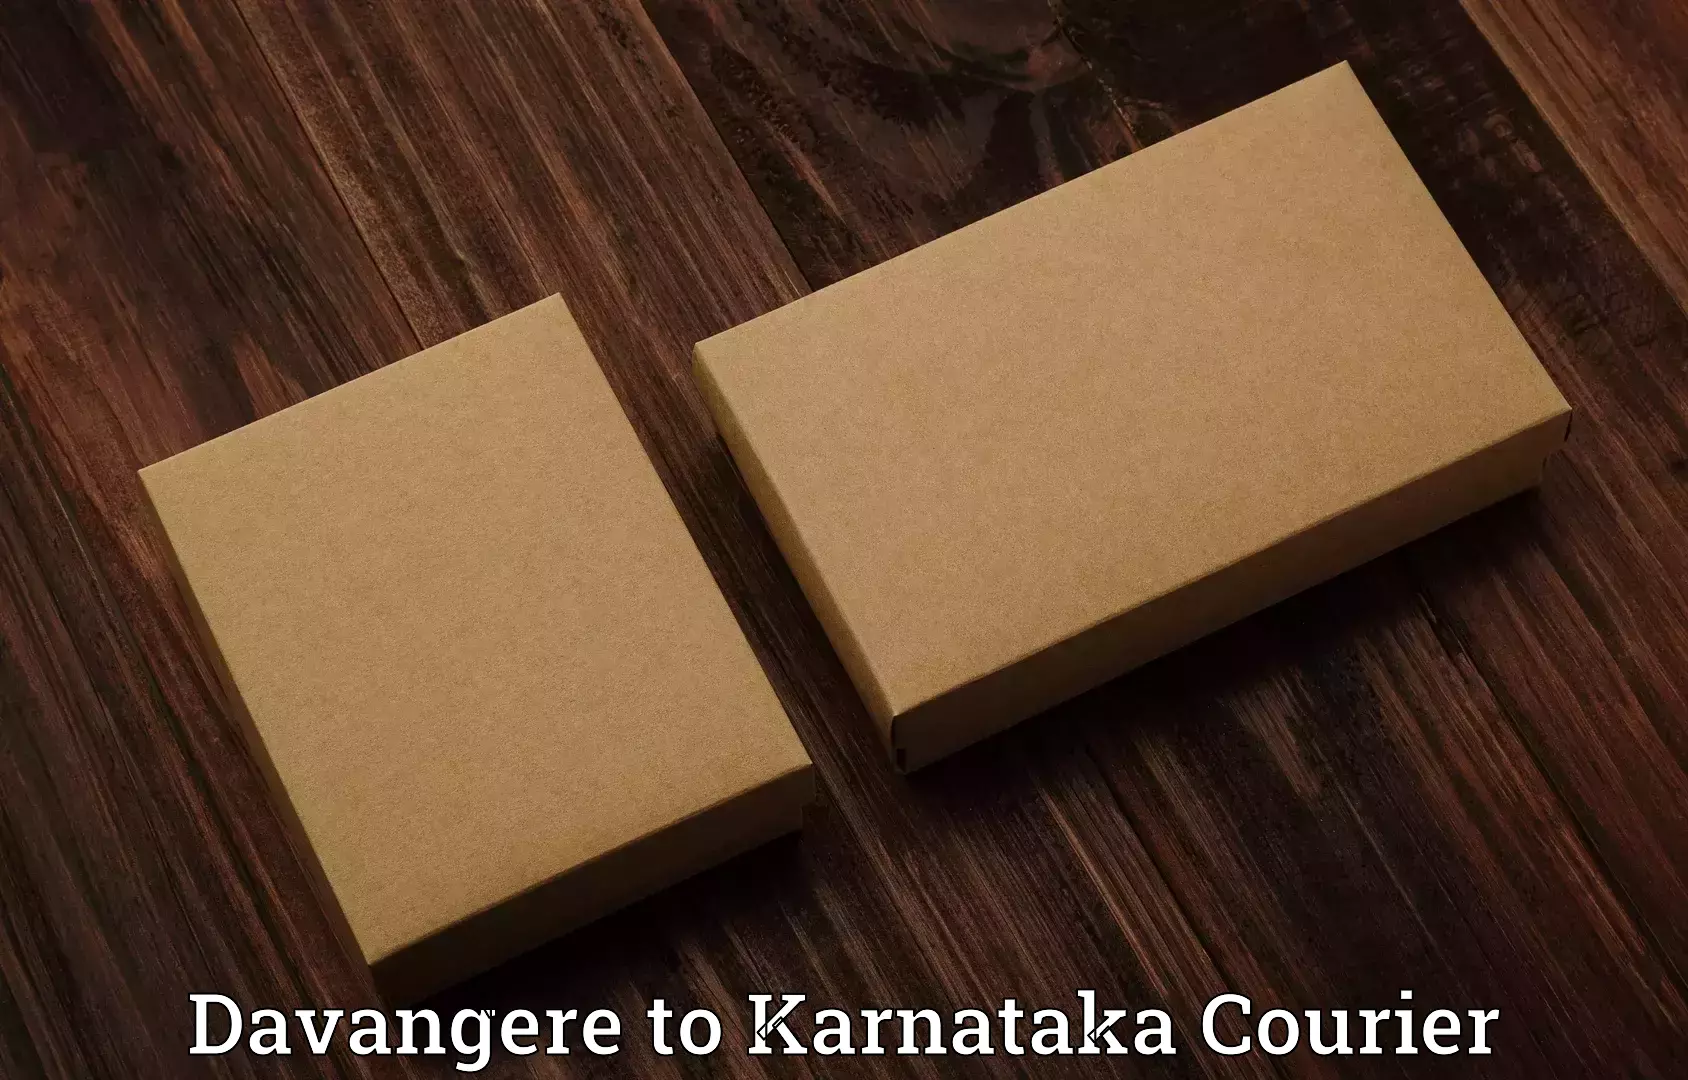 Instant baggage transport quote Davangere to Bethamangala